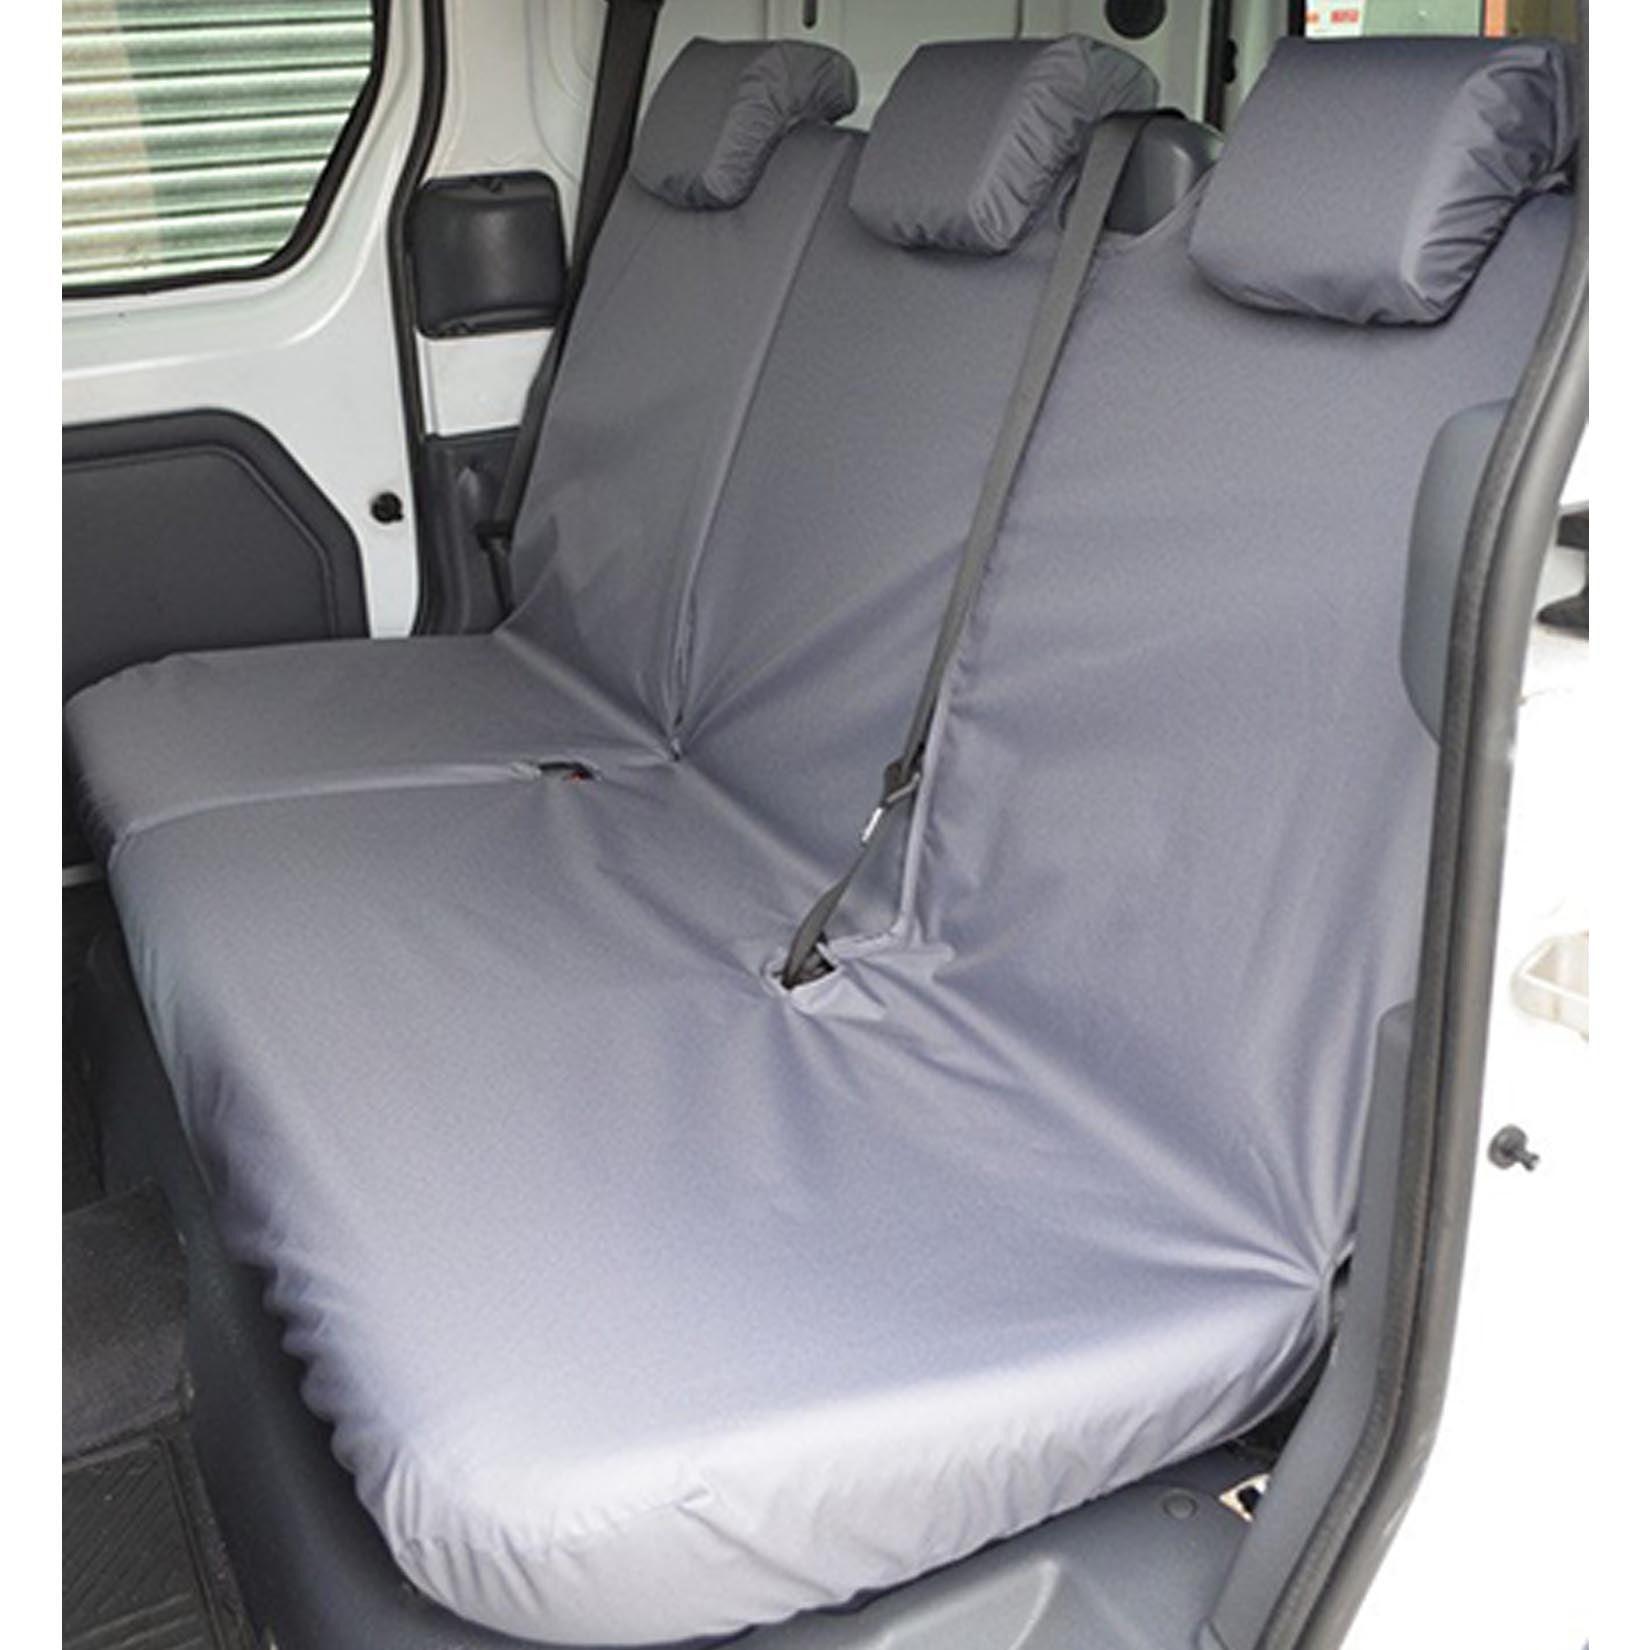 FORD TRANSIT CONNECT VAN 2002-2014 REAR PASSENGER SEAT COVERS - GREY - Storm Xccessories2